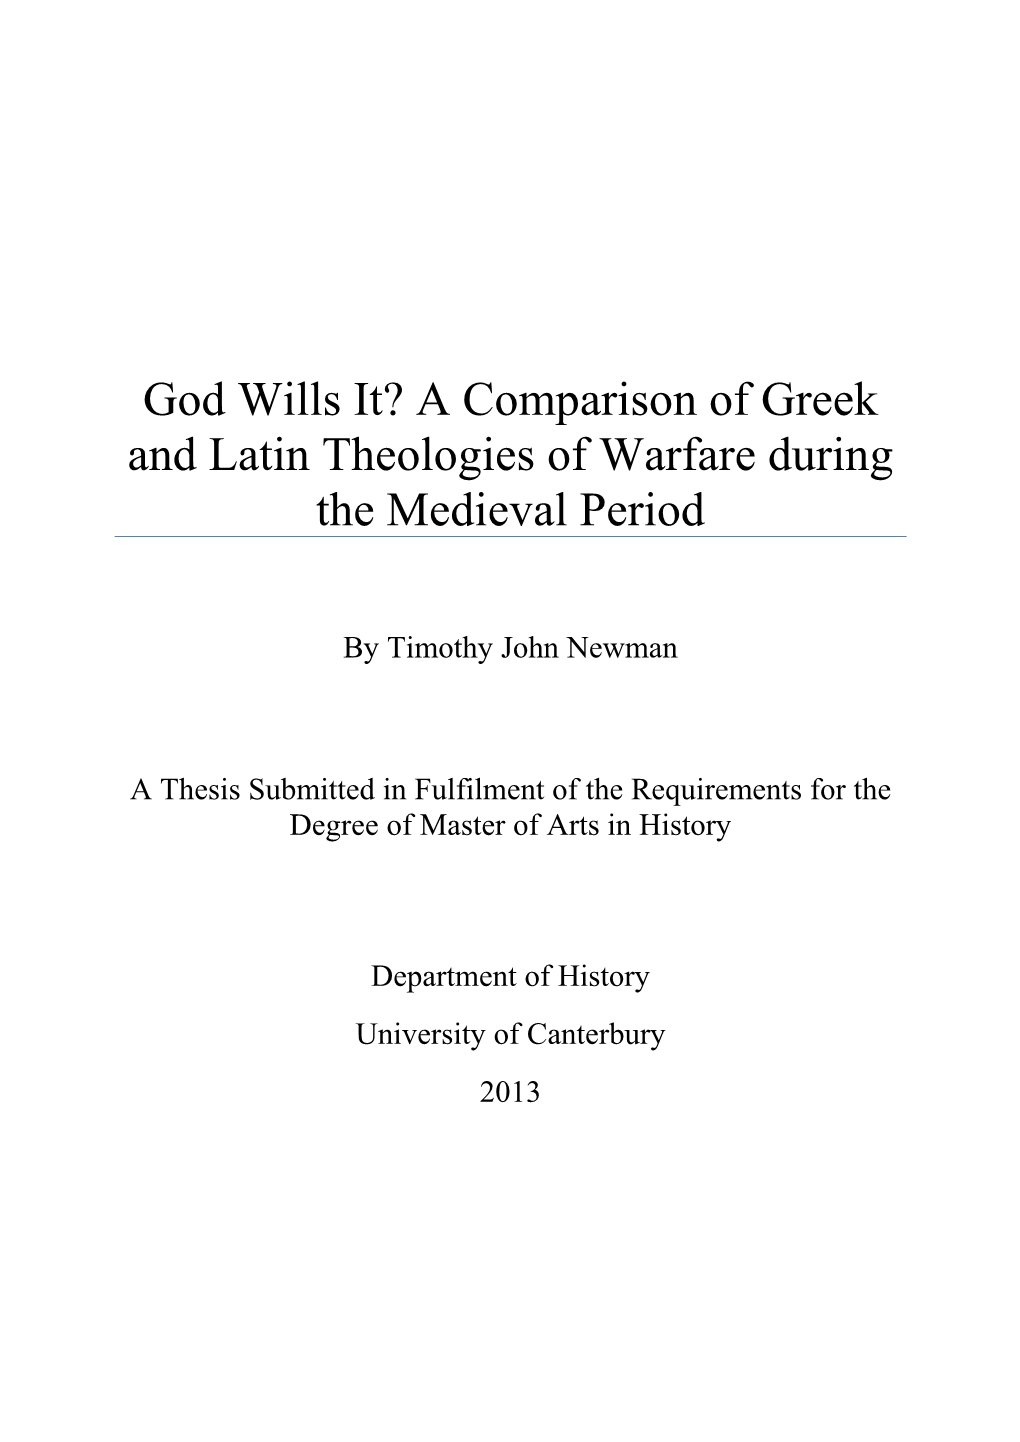 A Comparison of Greek and Latin Theologies of Warfare During the Medieval Period